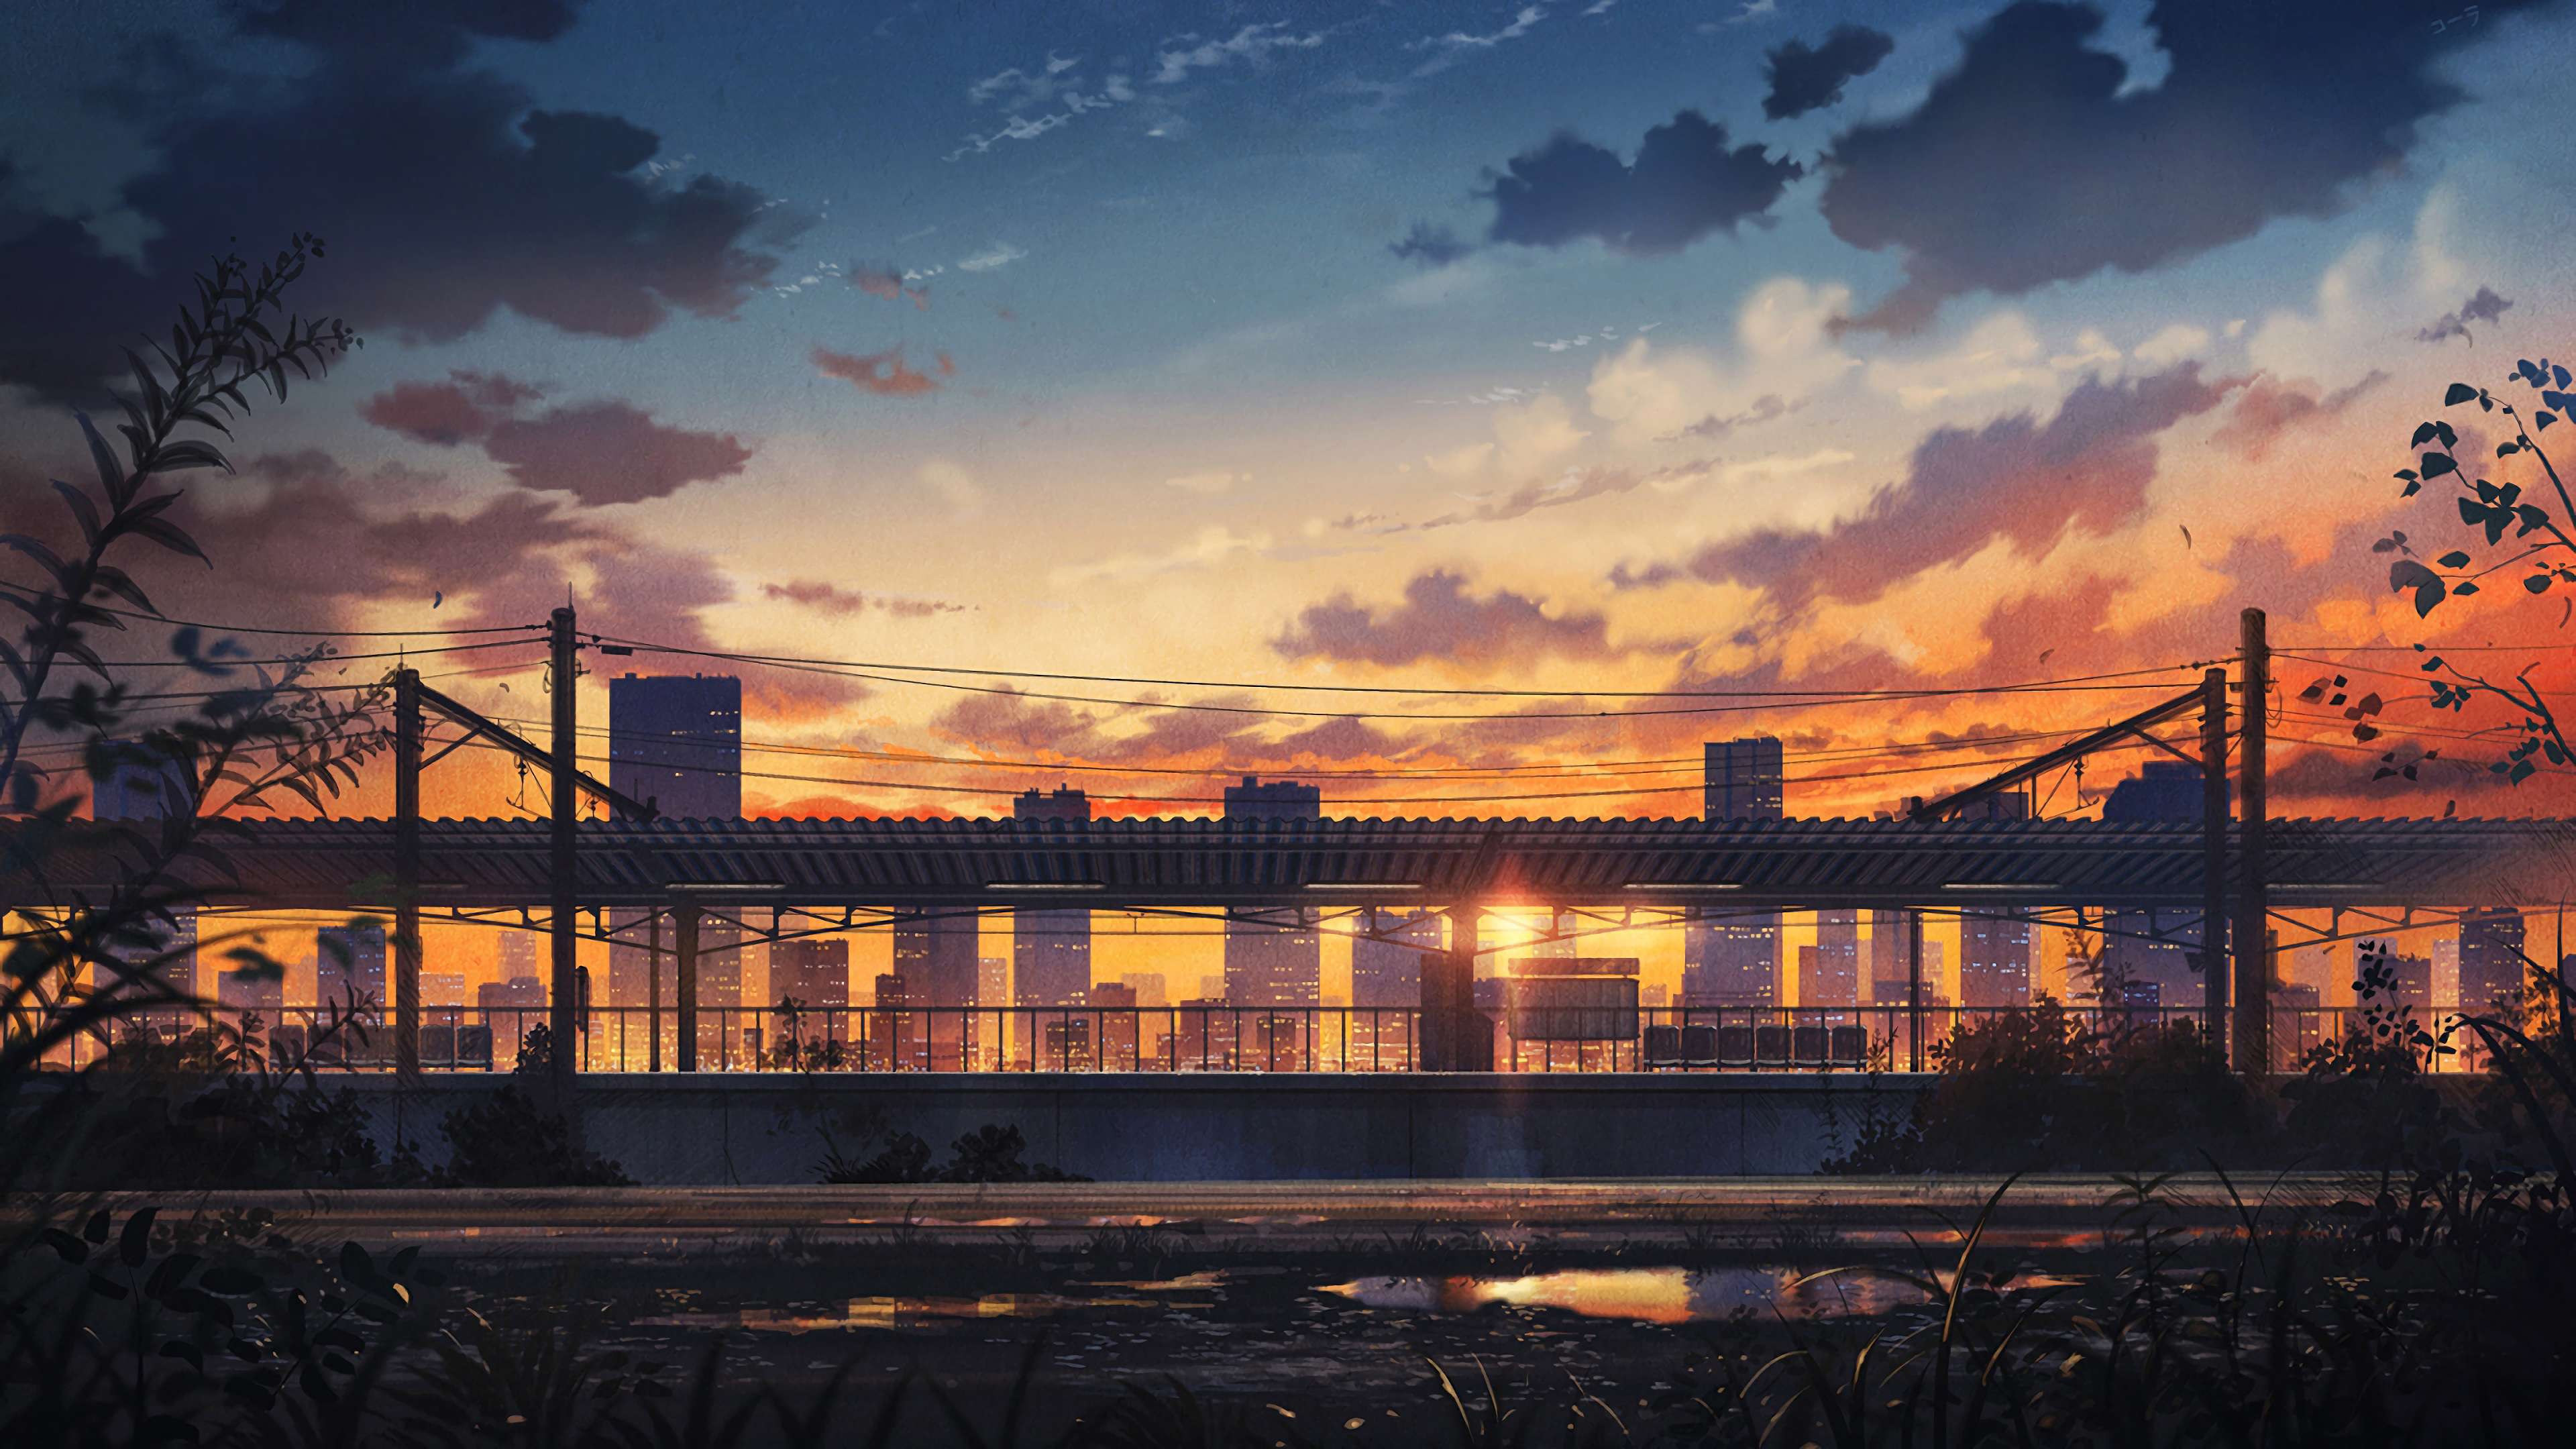 Aesthetic anime scenery wallpaper with a train station in the sunset - Anime sunset